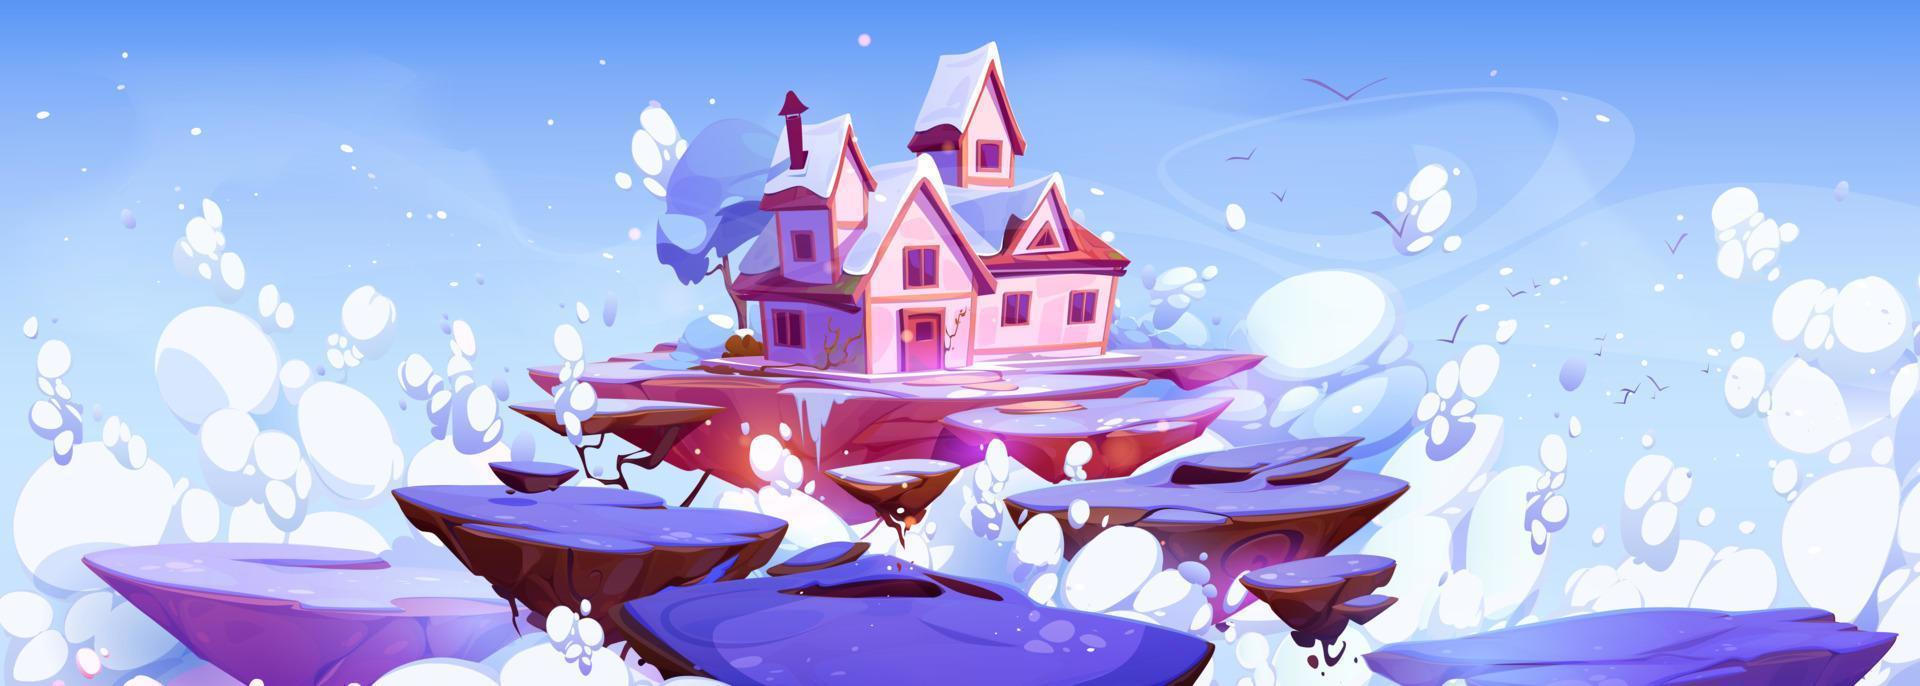 Fantasy house floating on island in blue sky vector